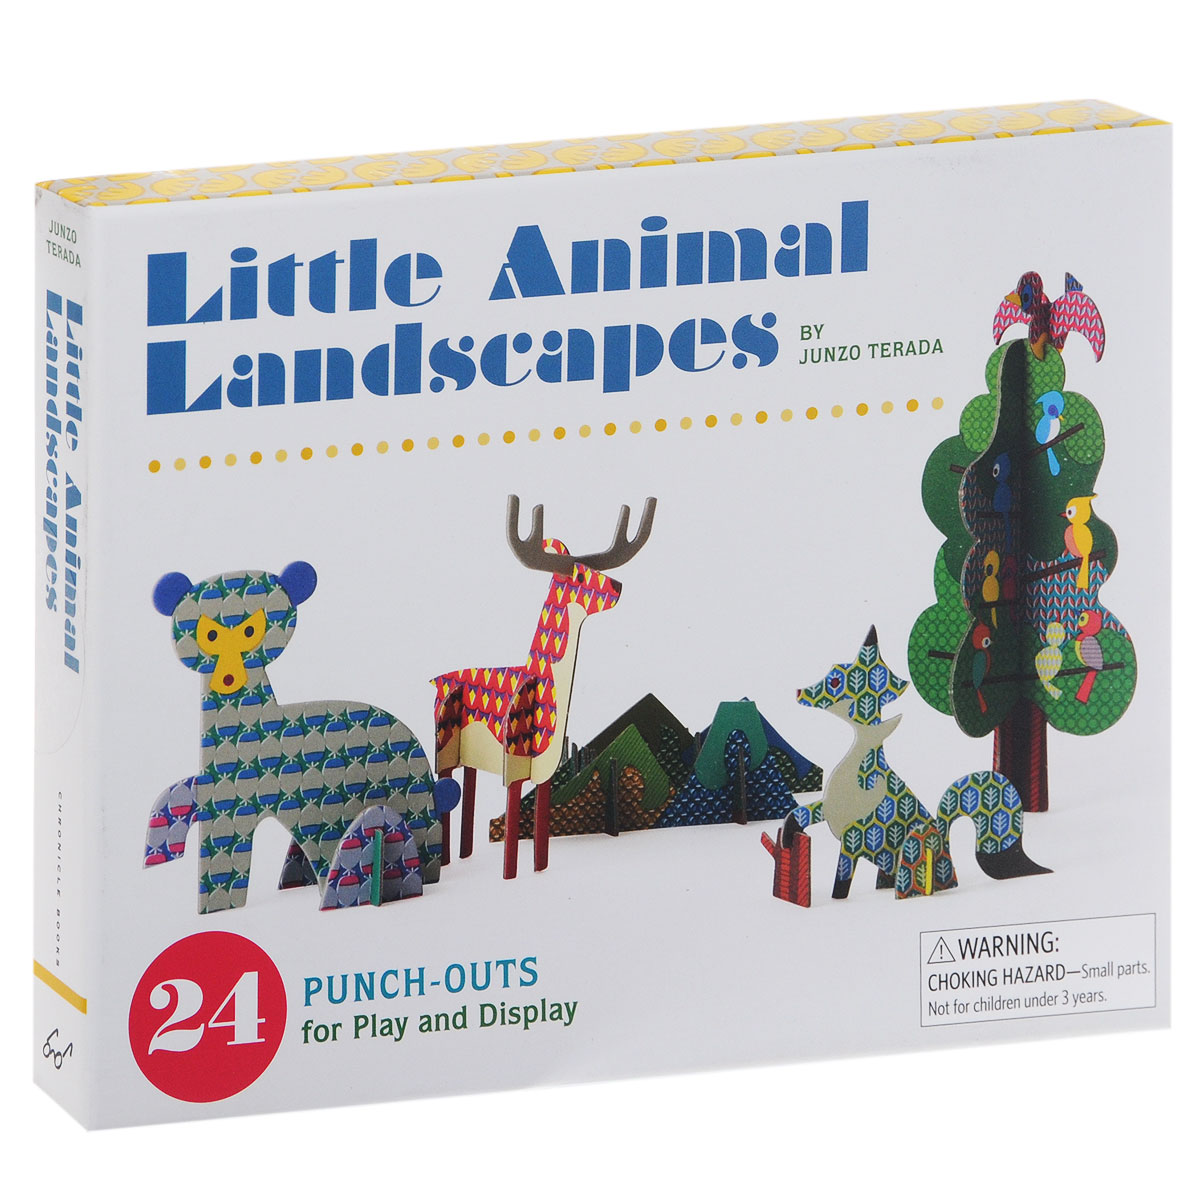 Little Animal Landscapes: 24 Punch-Outs for Play and Display